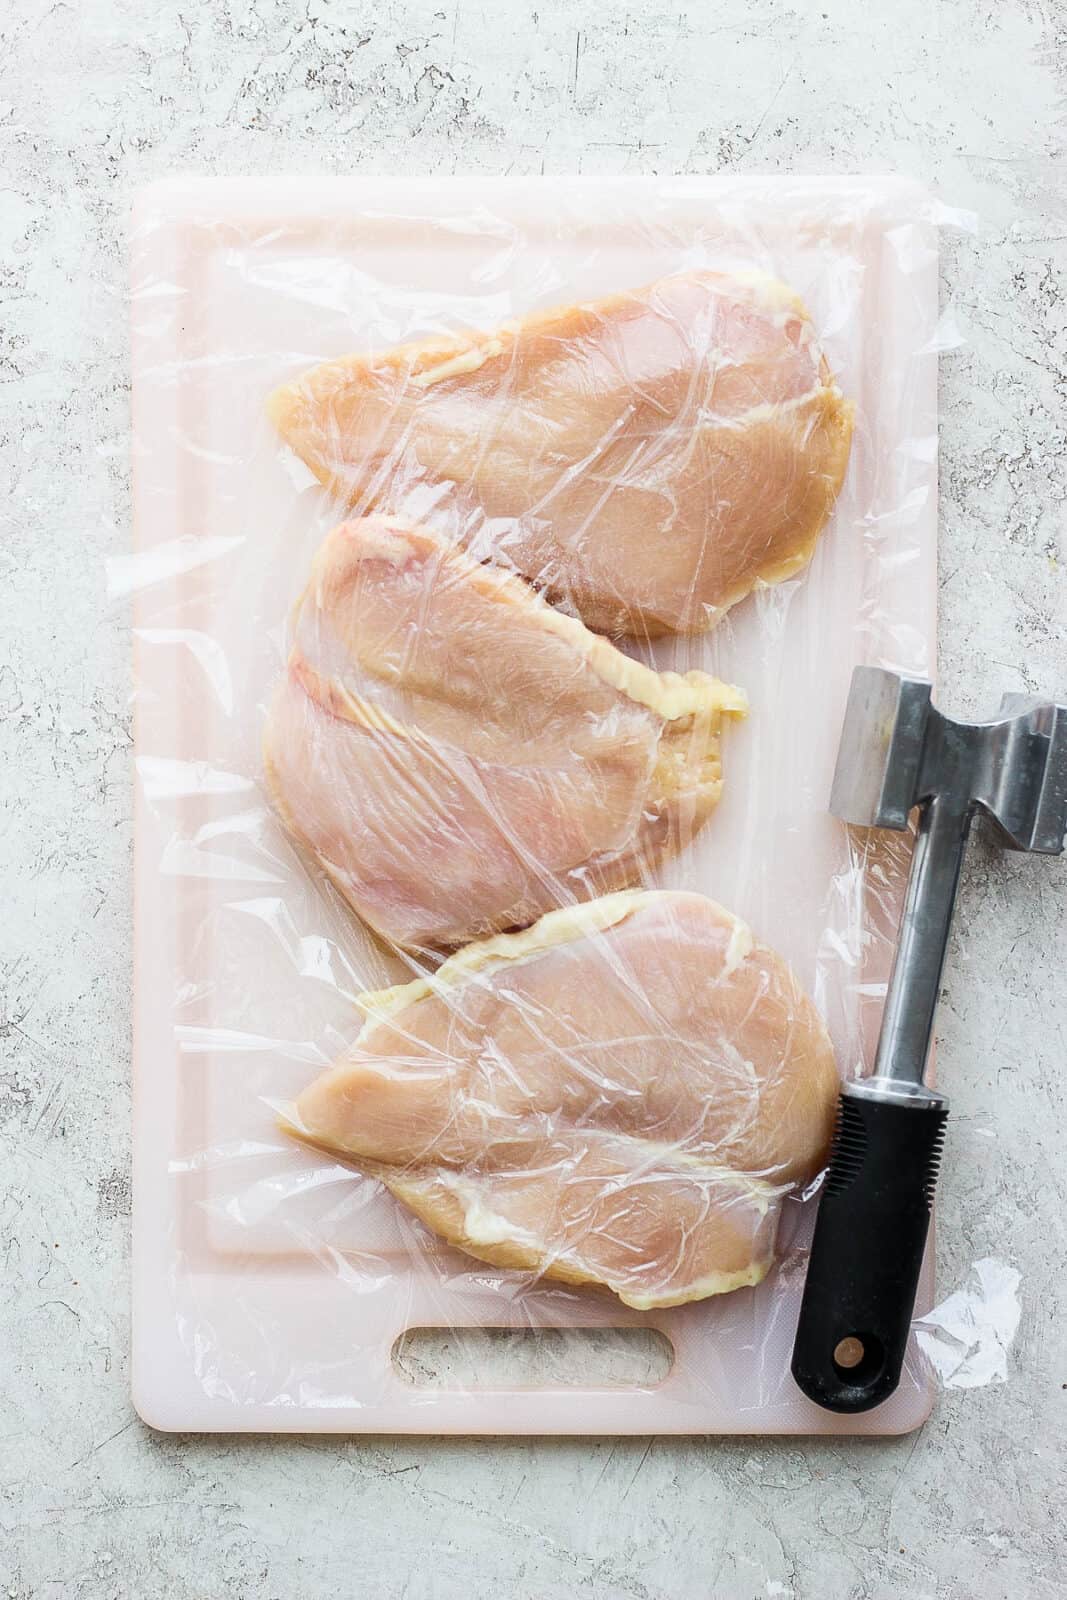 Chicken breasts flattened on a cutting board. 